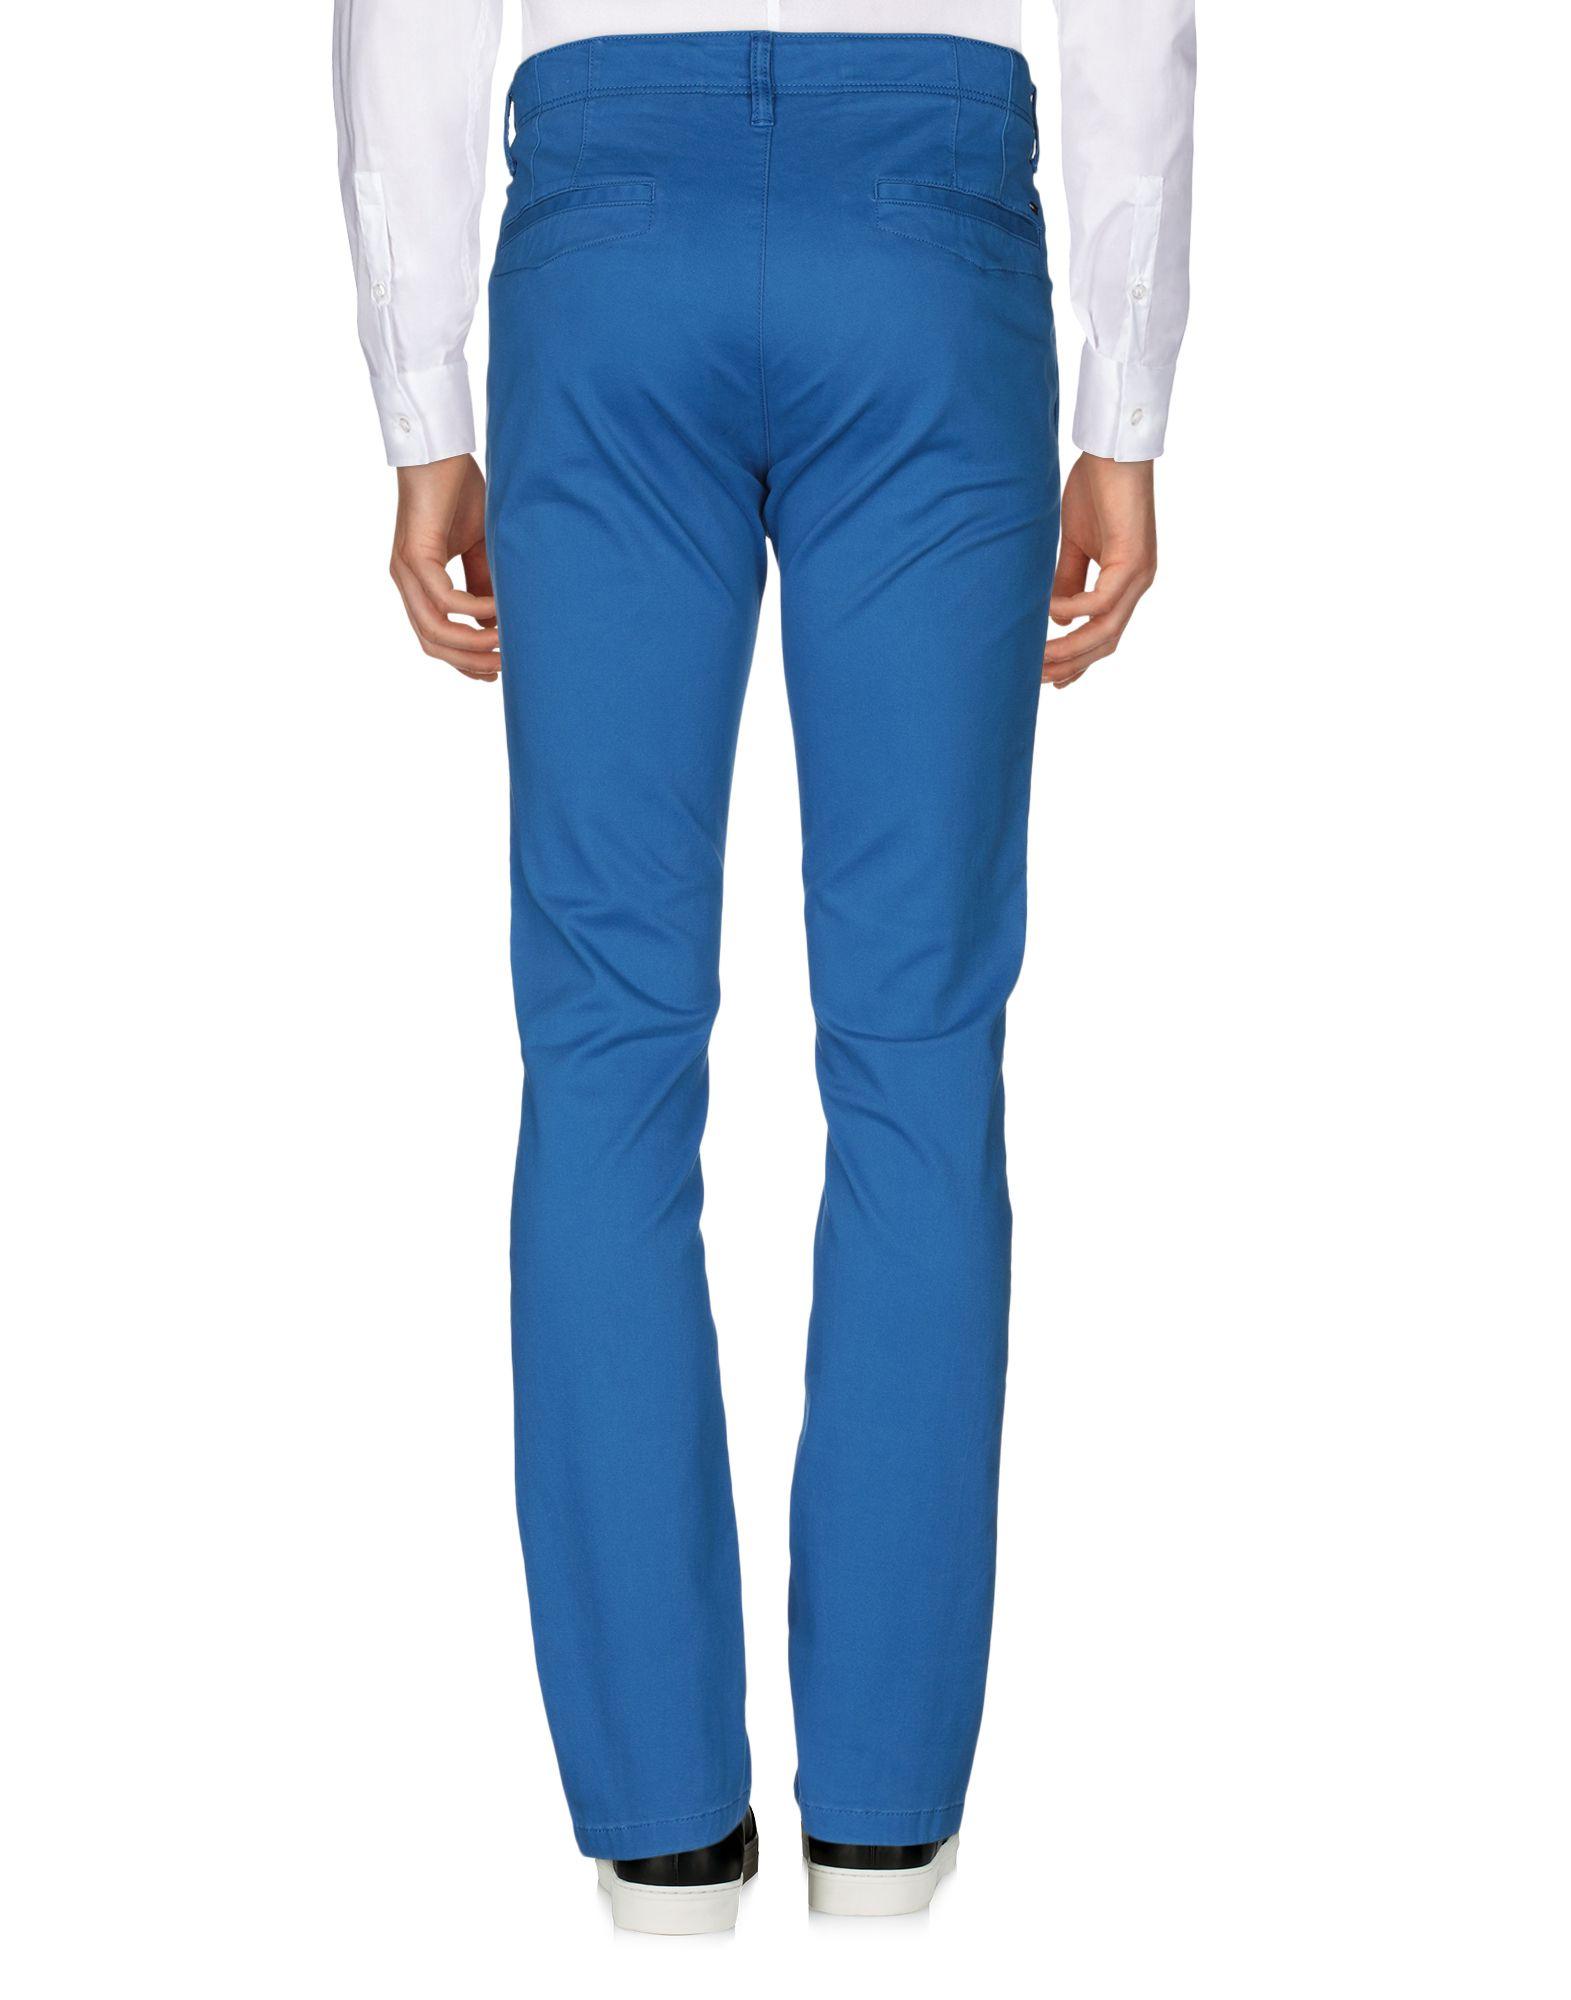 Tommy Hilfiger Cotton Casual Pants in Azure (Blue) for Men - Lyst